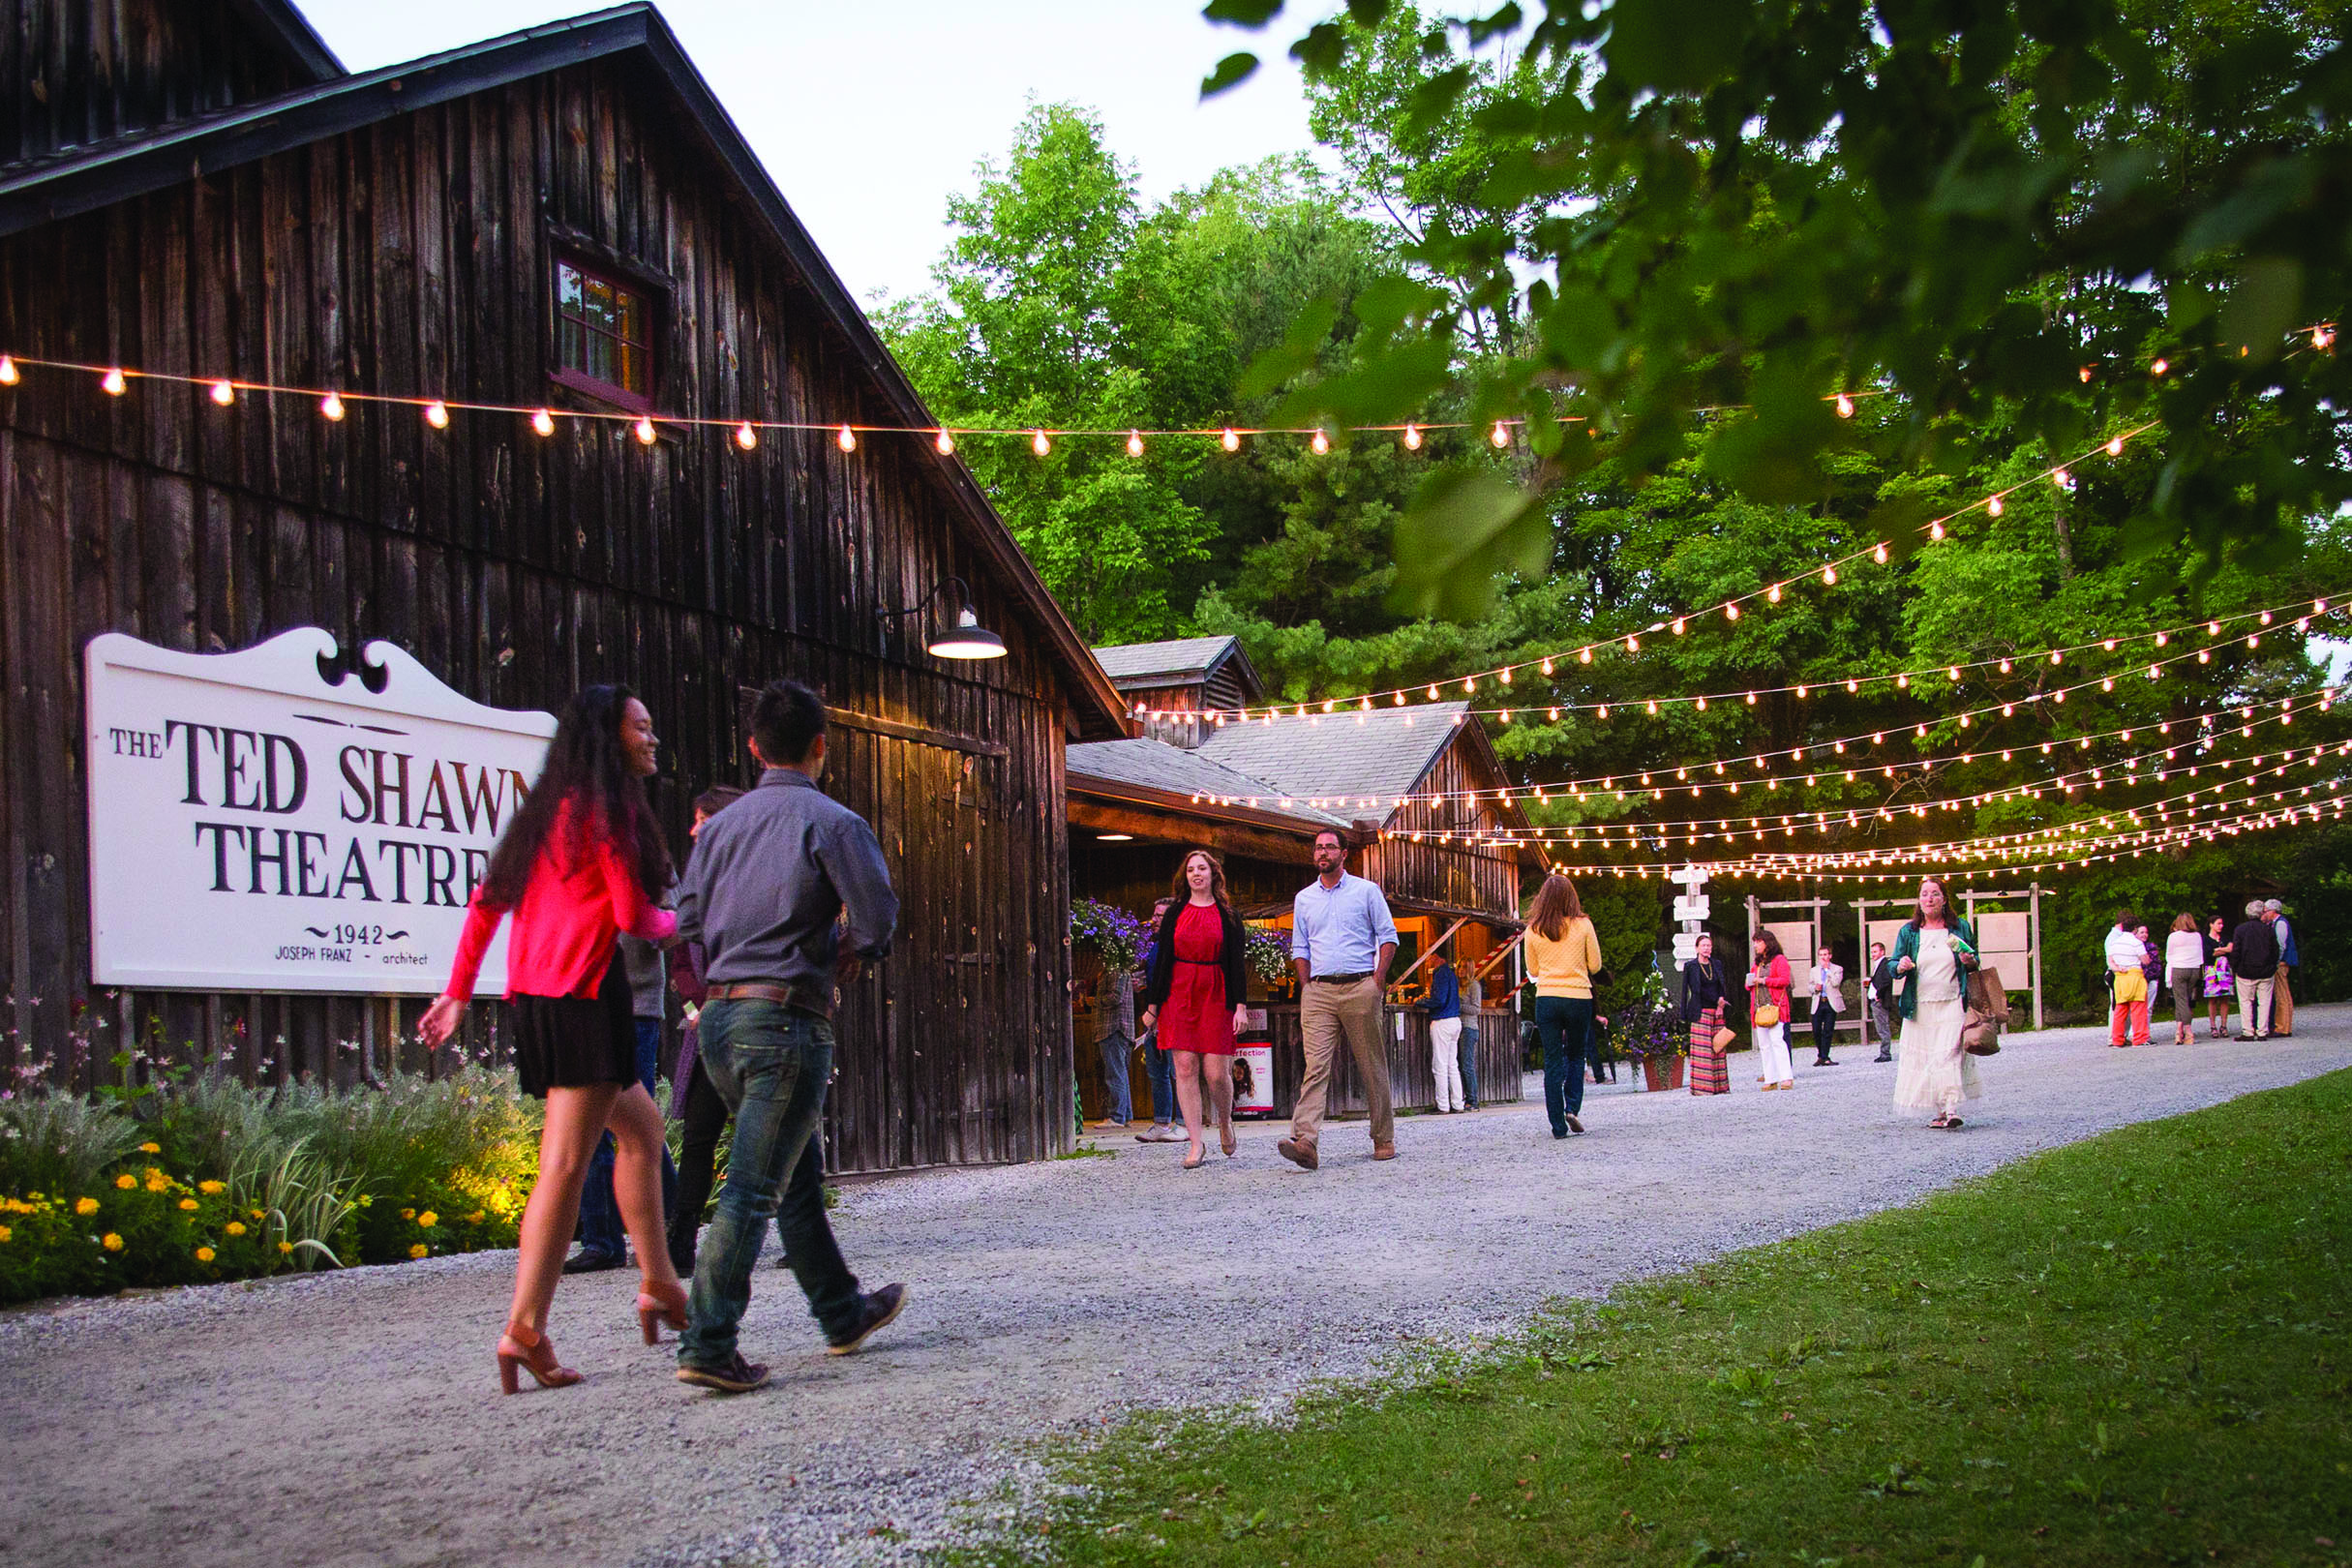 Spectators stroll along a path outside a dark wood barn with a large sign declaring it to be "The Ted Shawn Theatre, 1942." Fairy lights are strung up overhead, while treetops surround the area.